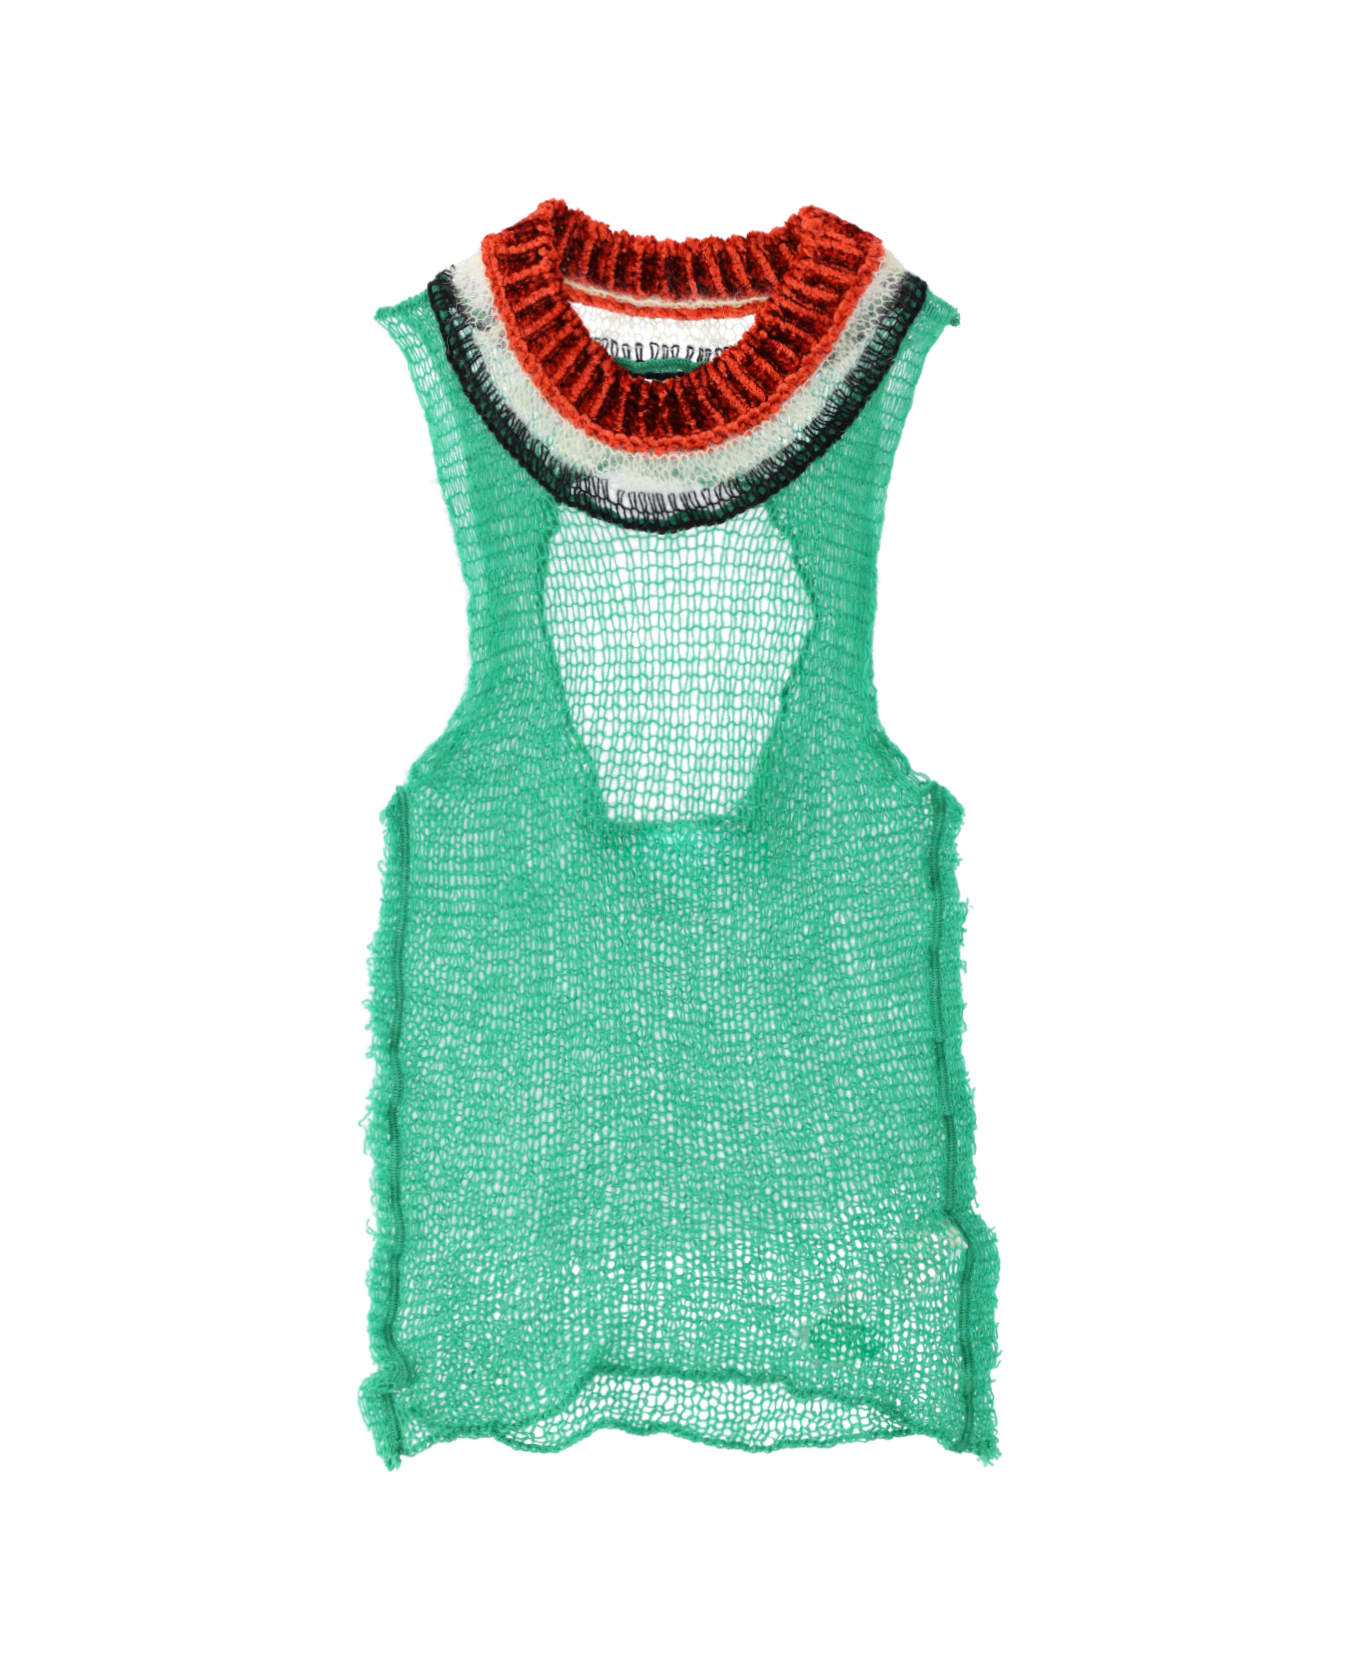 Marni Back Cut-out Top - Green